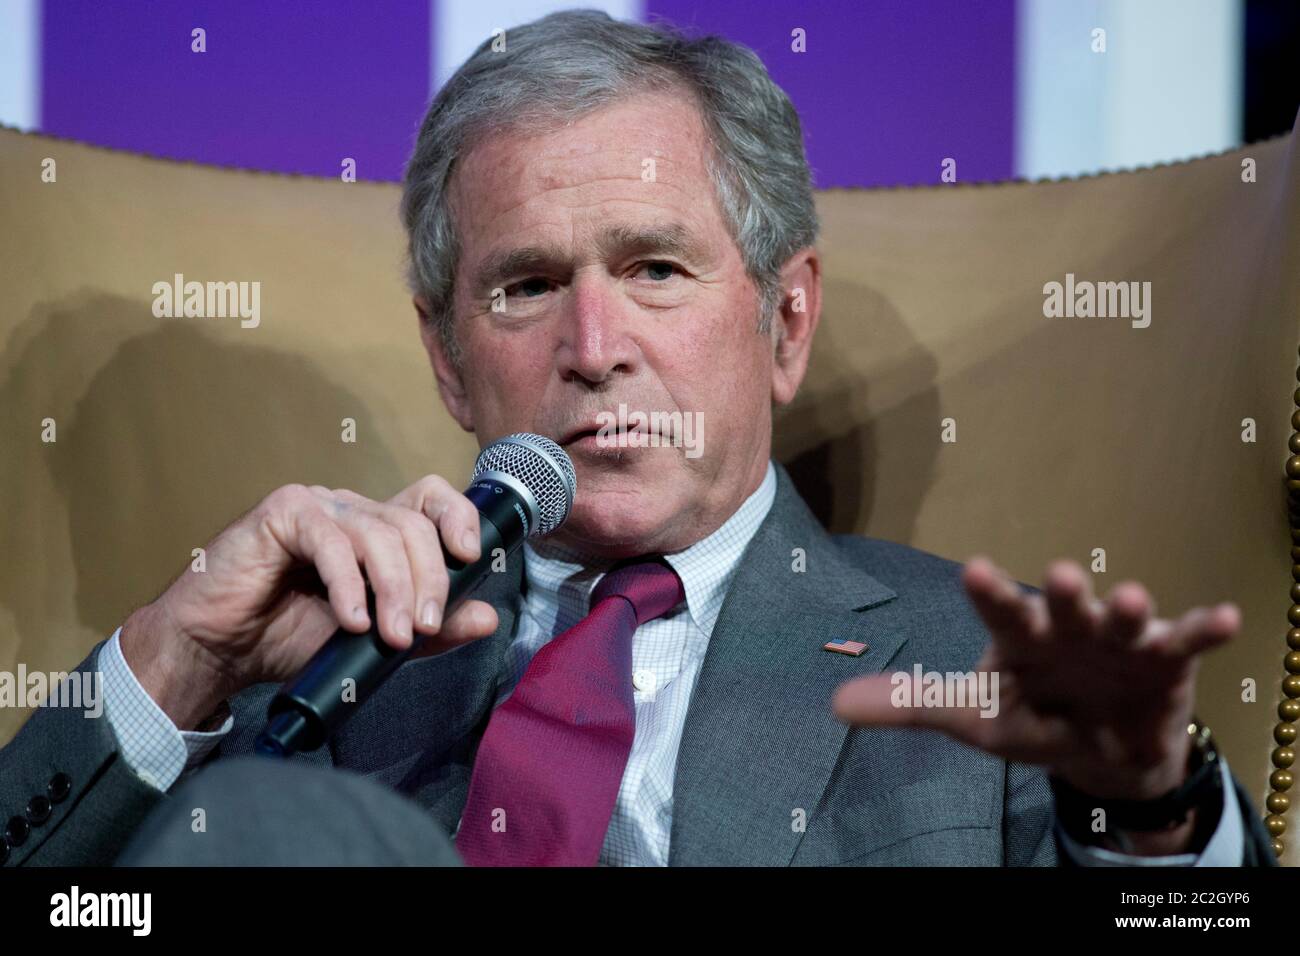 Dallas Texas USA, April 24 2014: Former U.S. President George W. Bush reflects on his challenging eight years in office during a one-hour speech at the Texas Apartment Association's annual convention. Bush is promoting his new book, 'Decision Points.'   ©Bob Daemmrich Stock Photo